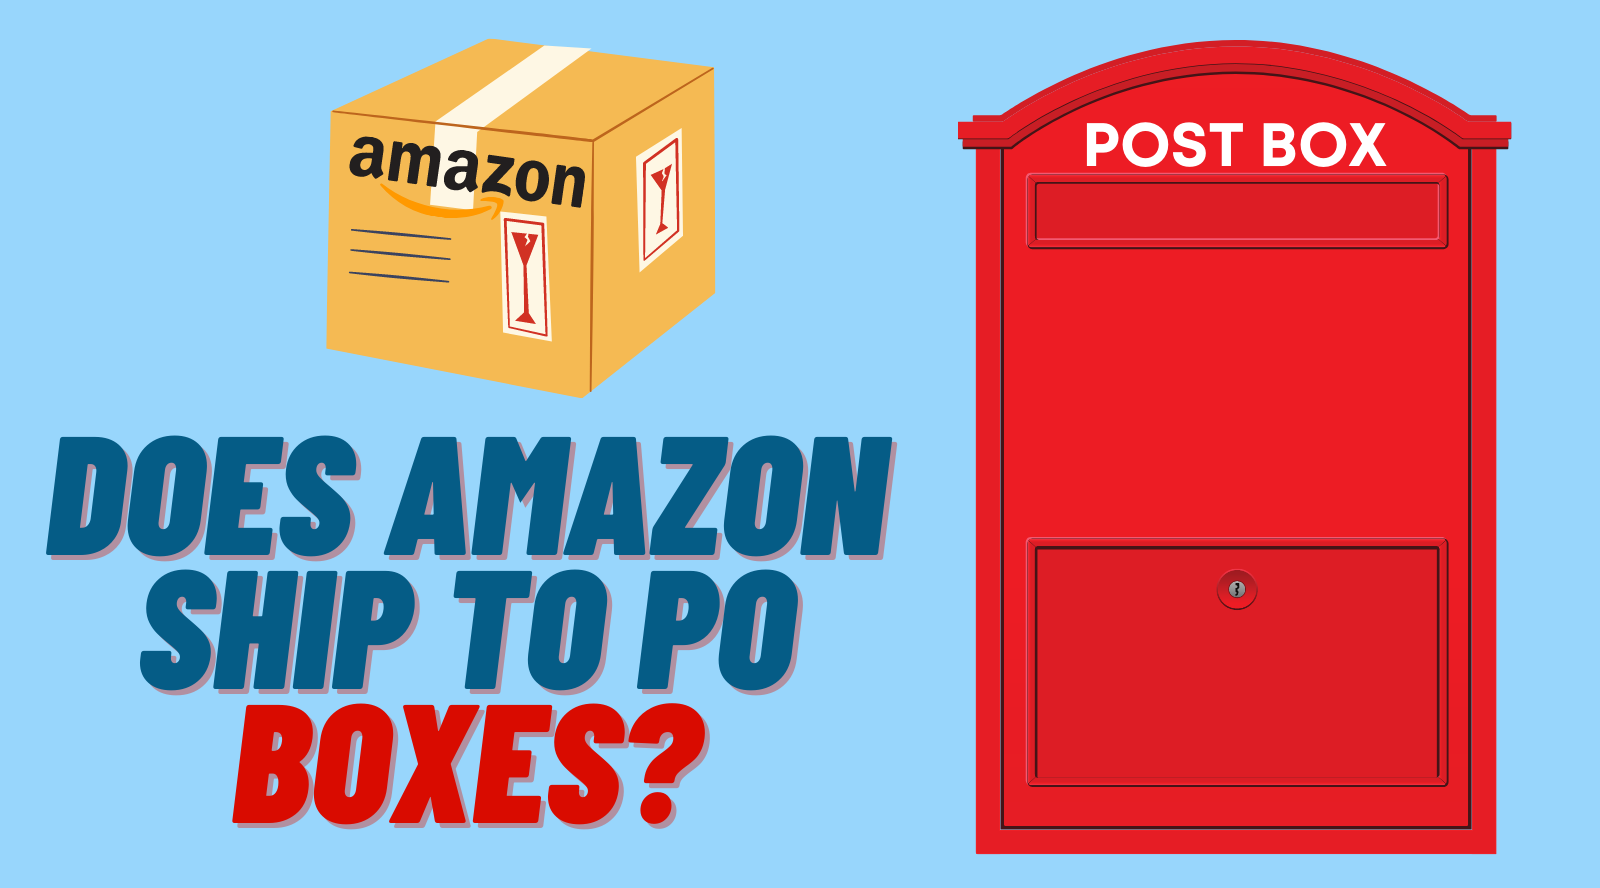 Does Amazon Ship to PO Boxes? Here’s What You Should Know